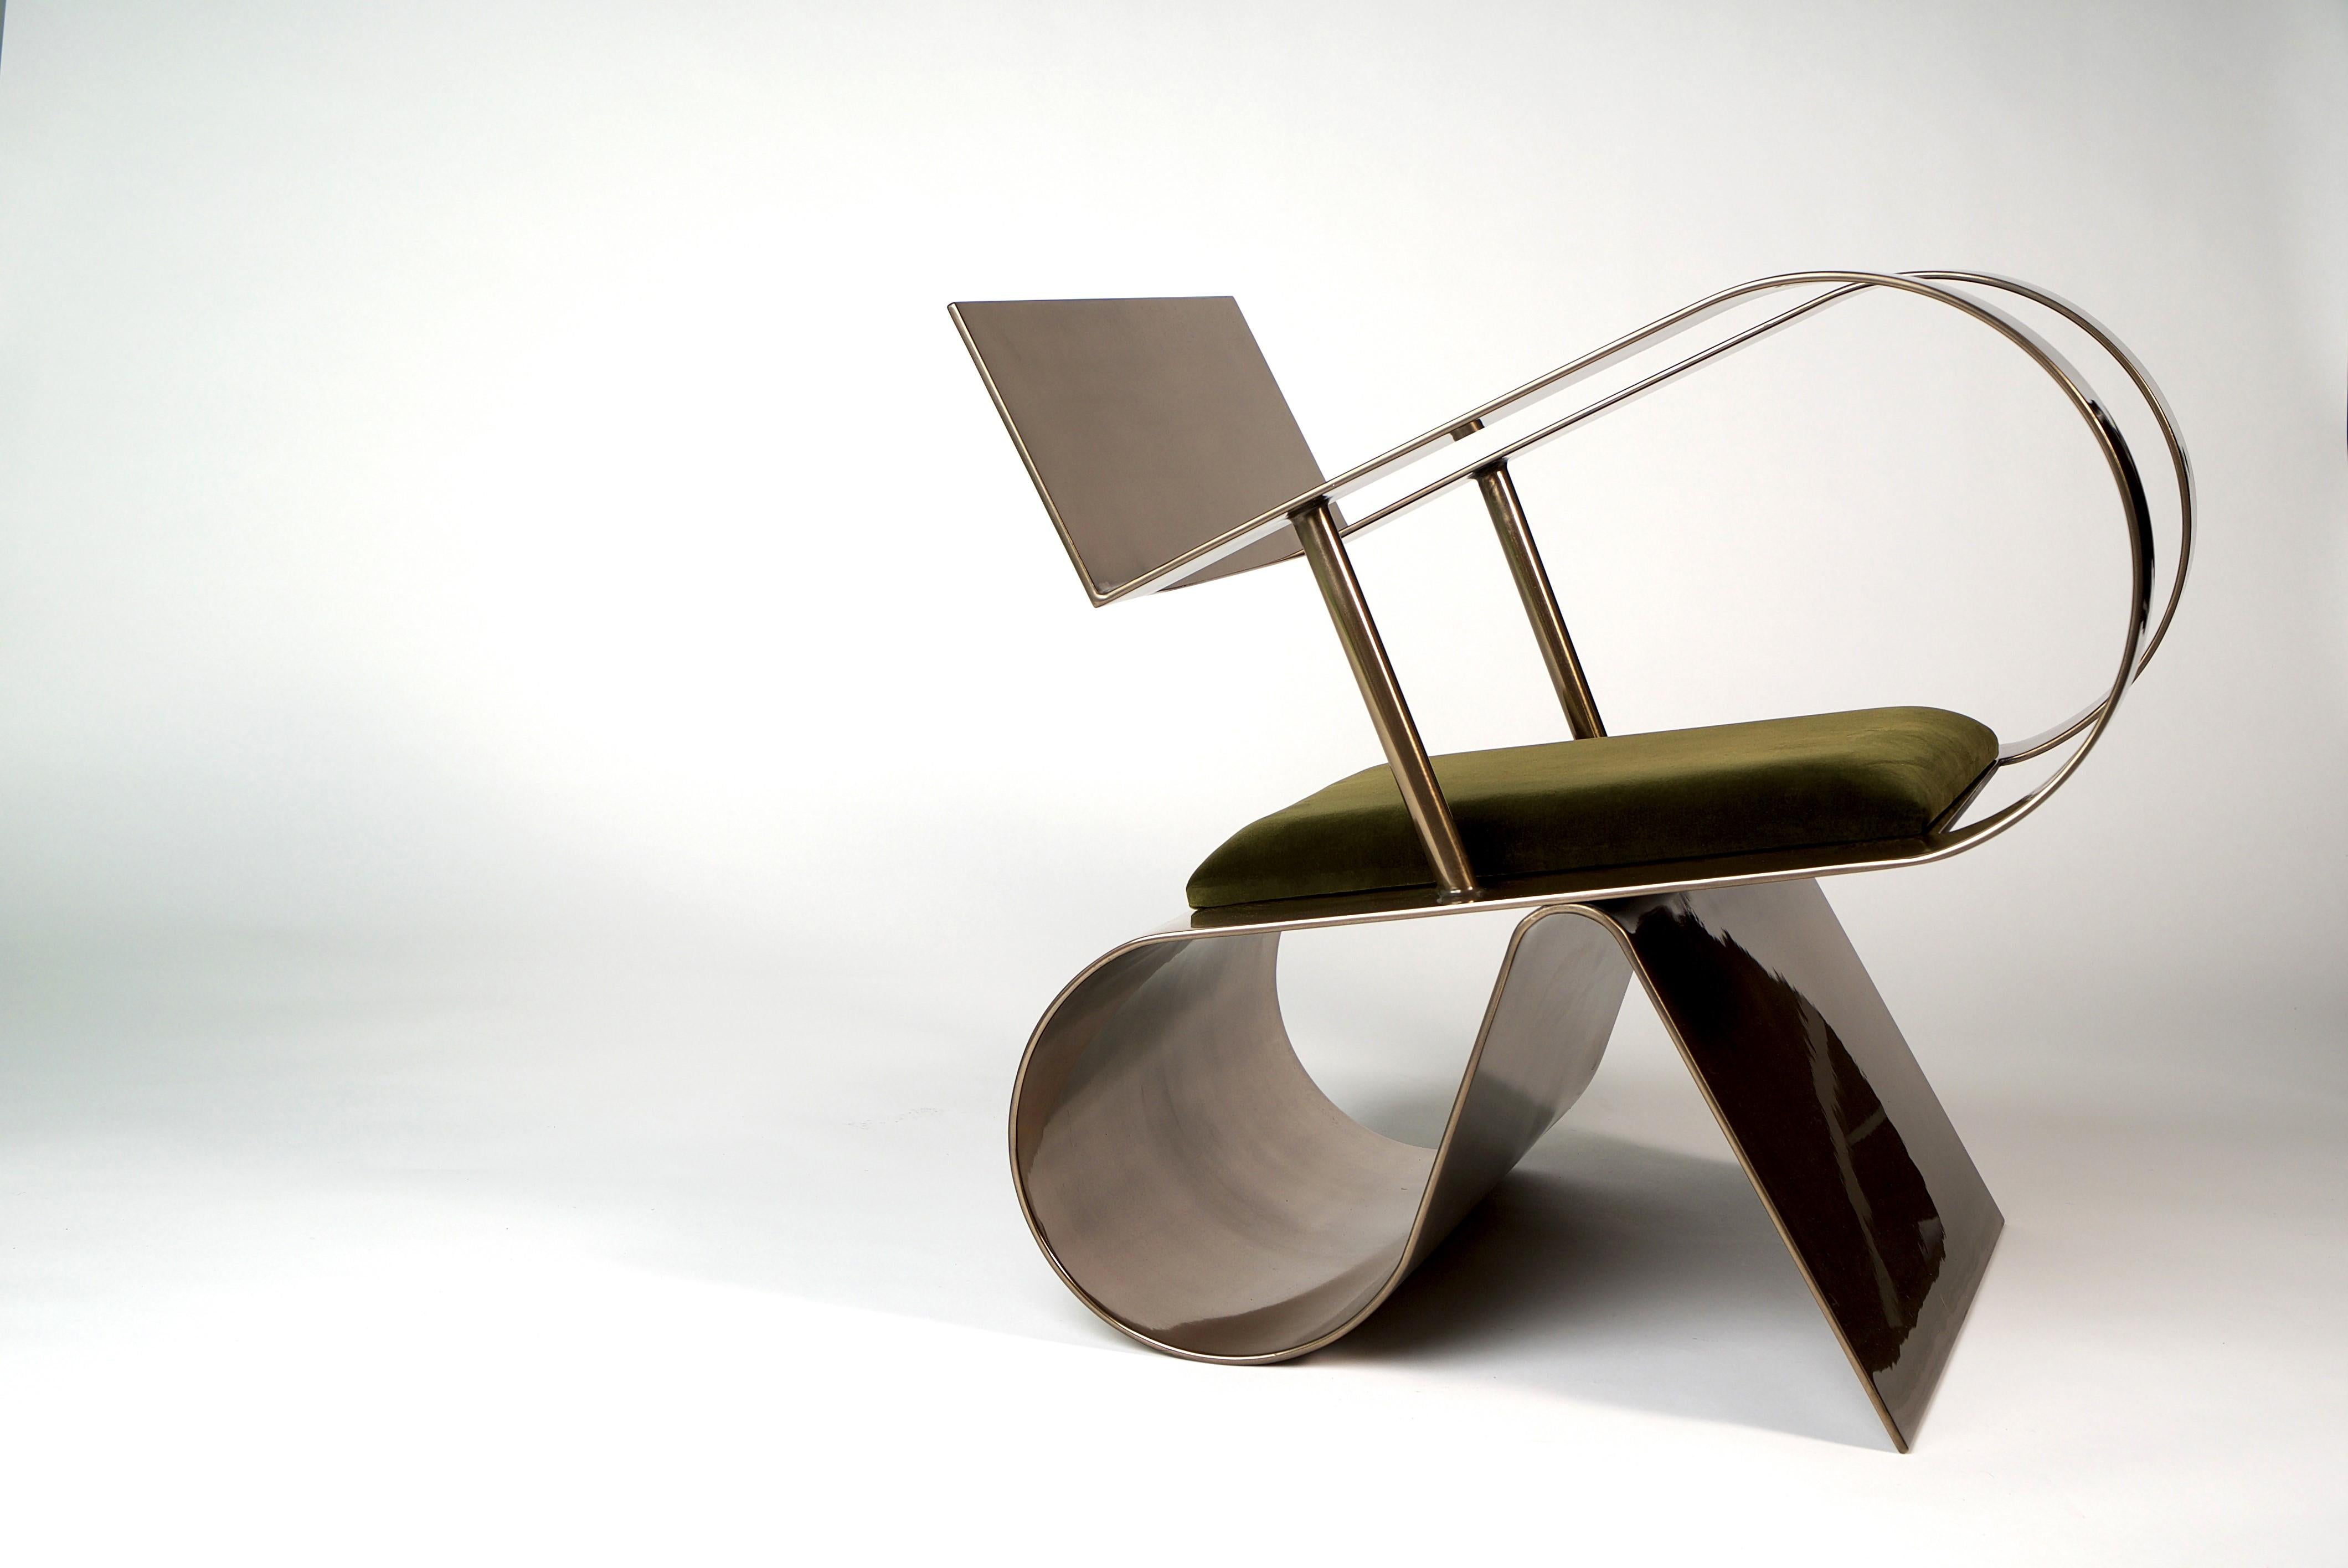 Symphony chair by Jason Mizrahi
Dimensions: W 45.72 x D 81.28 x H 71.12 cm
Materials: Aluminum with bronze powder, coat finish
Stain/Color/Finish: Customized upon request
Seat cushion: Shown in velvet (customized upon request)

Jason Mizrahi